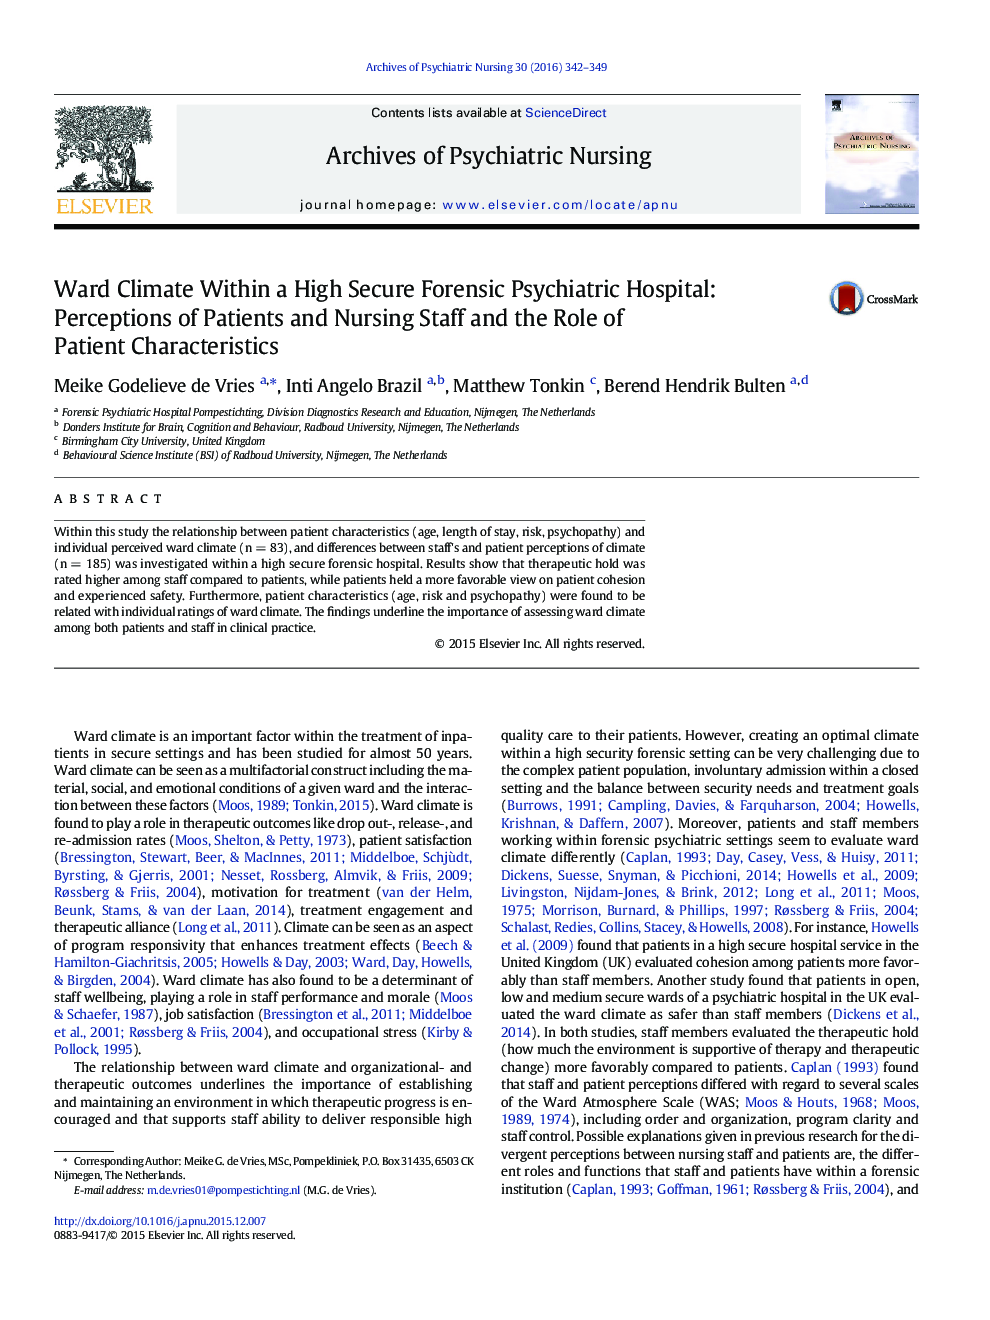 Ward Climate Within a High Secure Forensic Psychiatric Hospital: Perceptions of Patients and Nursing Staff and the Role of Patient Characteristics